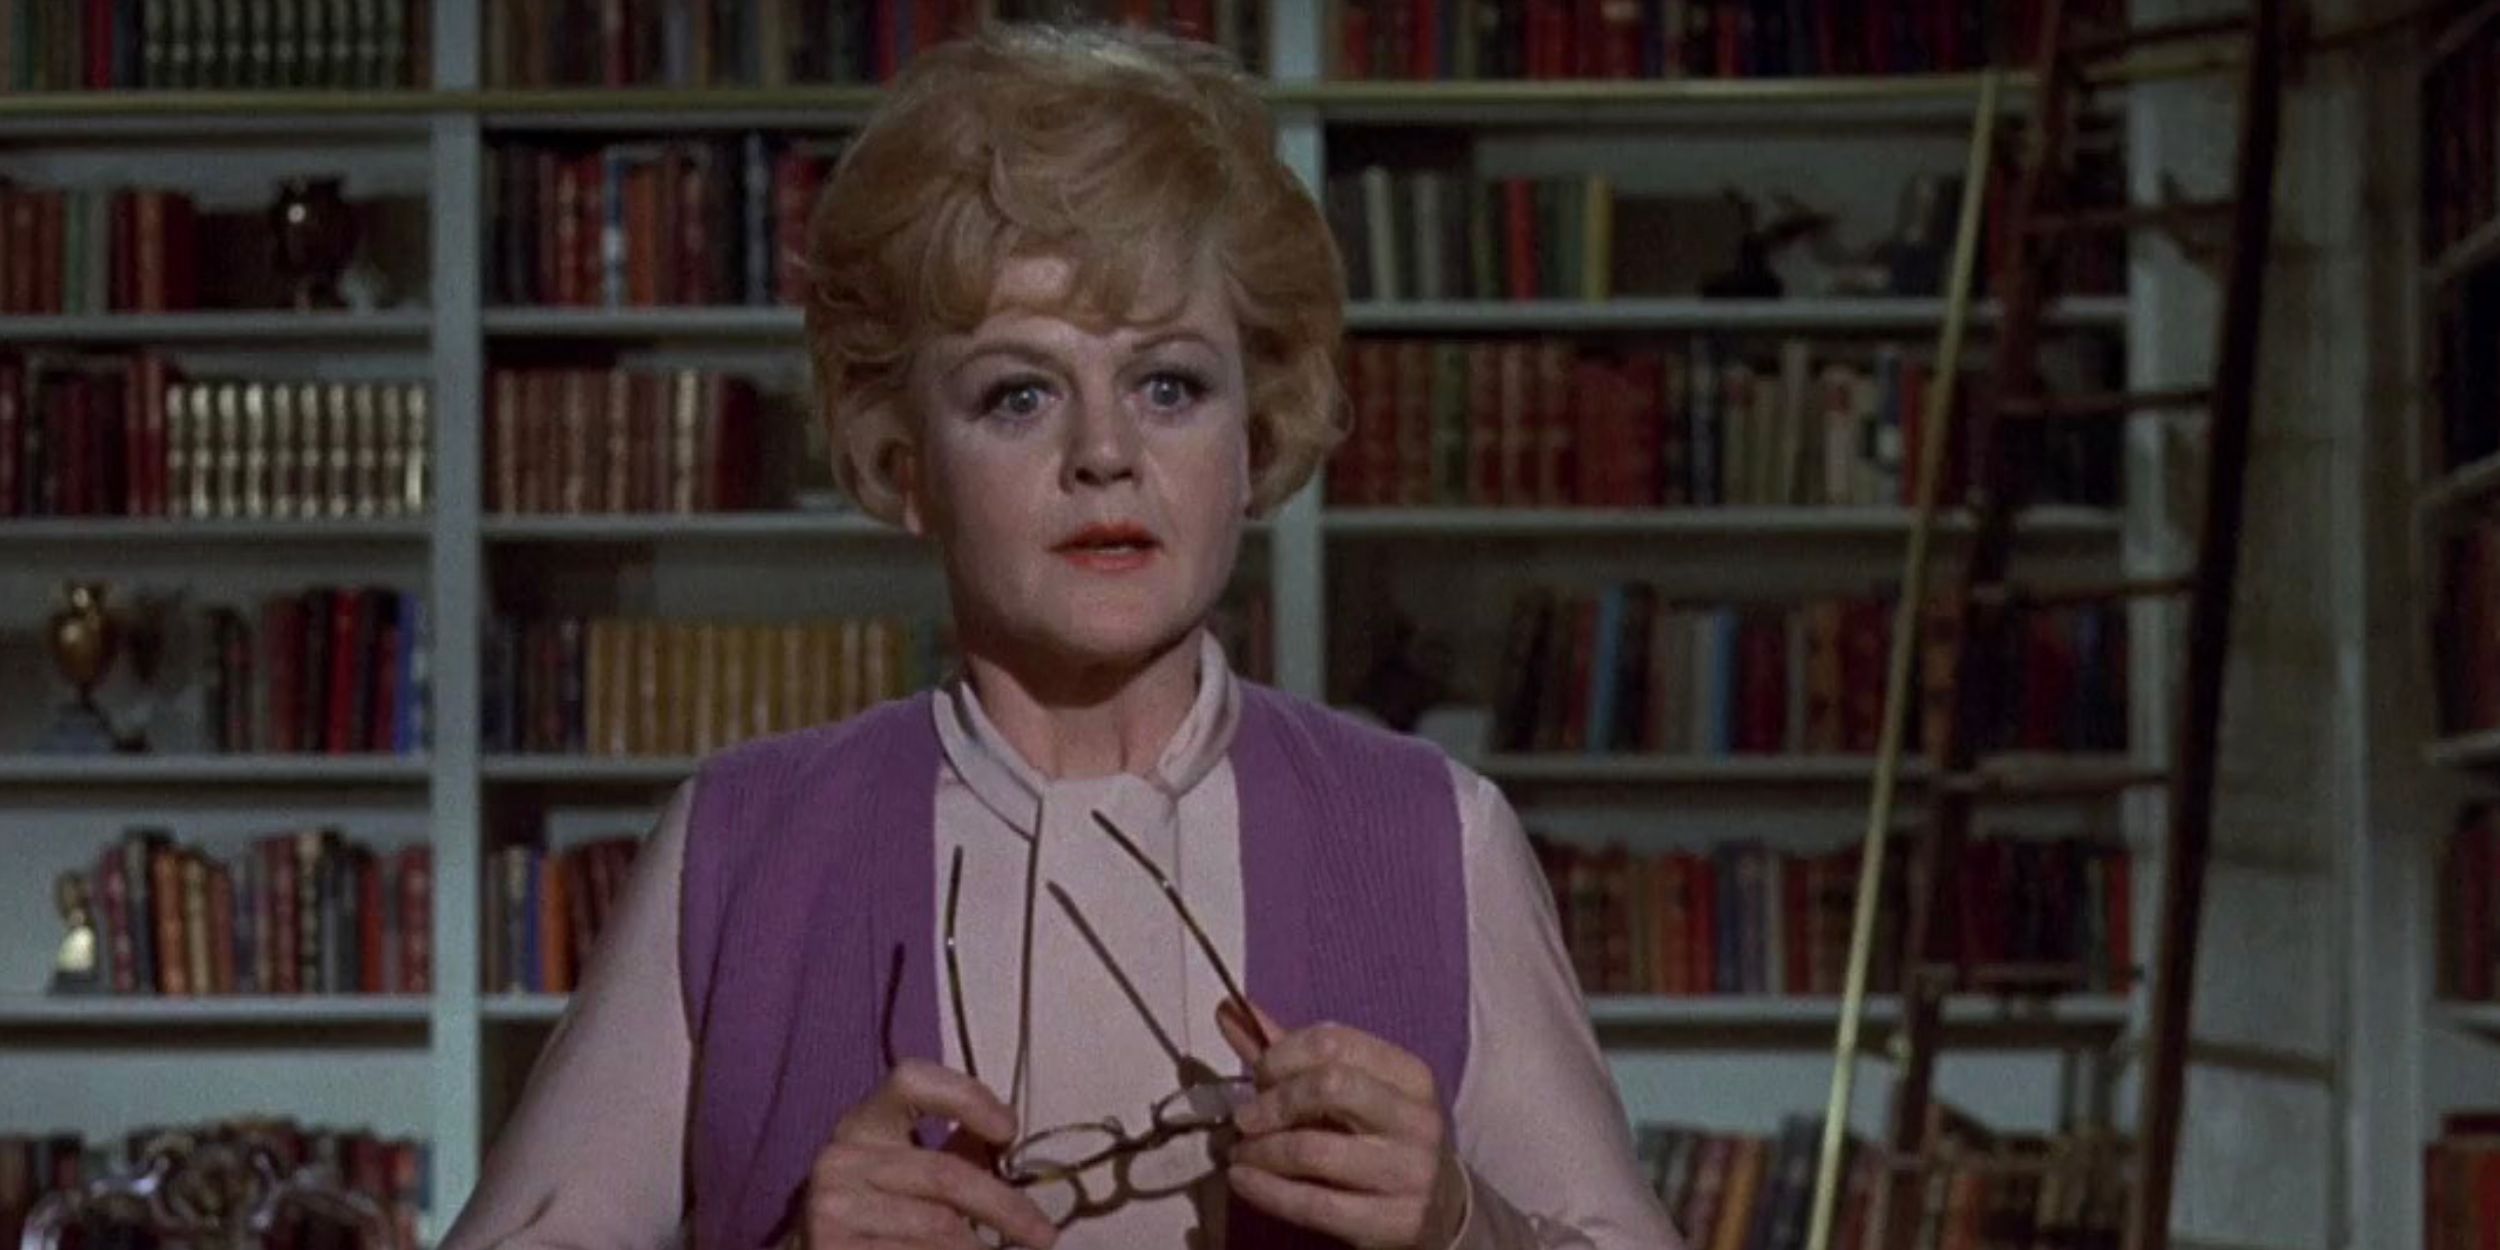 Eglantine Prince holding her glasses in a library in Bedknobs and Broomsticks